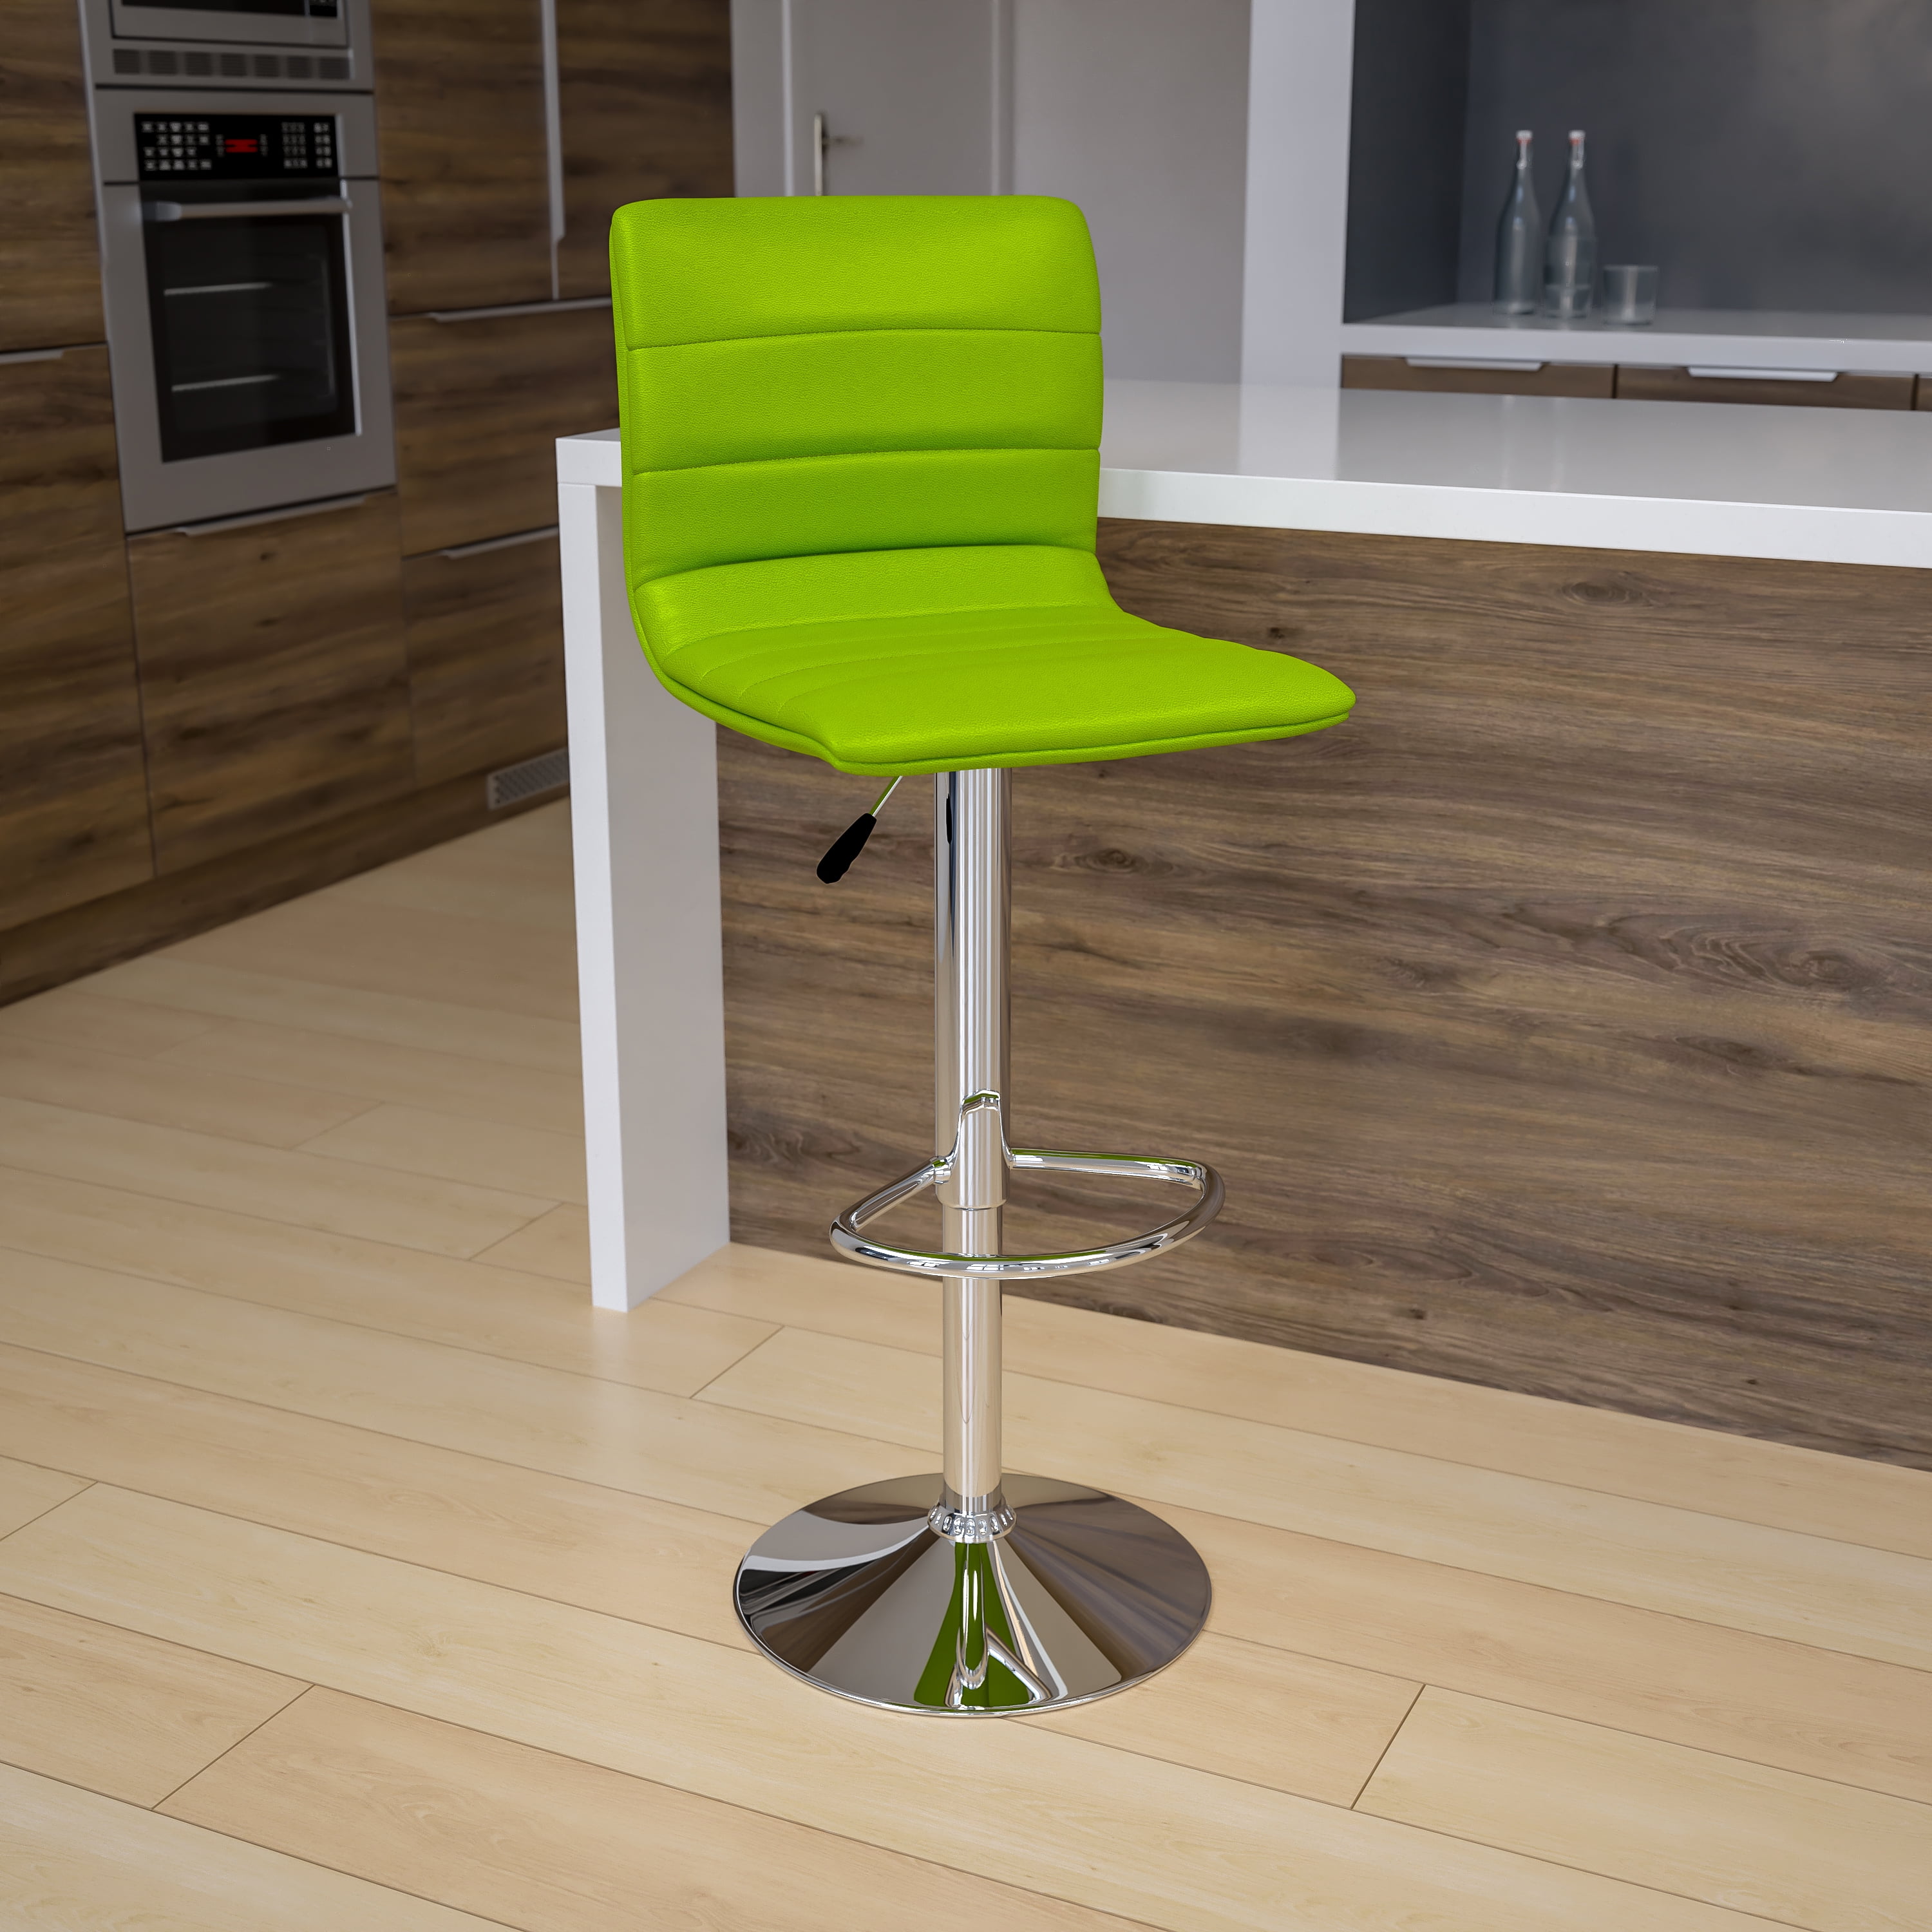 BizChair Modern Green Vinyl Adjustable Bar Stool with Back, Swivel Stool  with Chrome Pedestal Base and Footrest